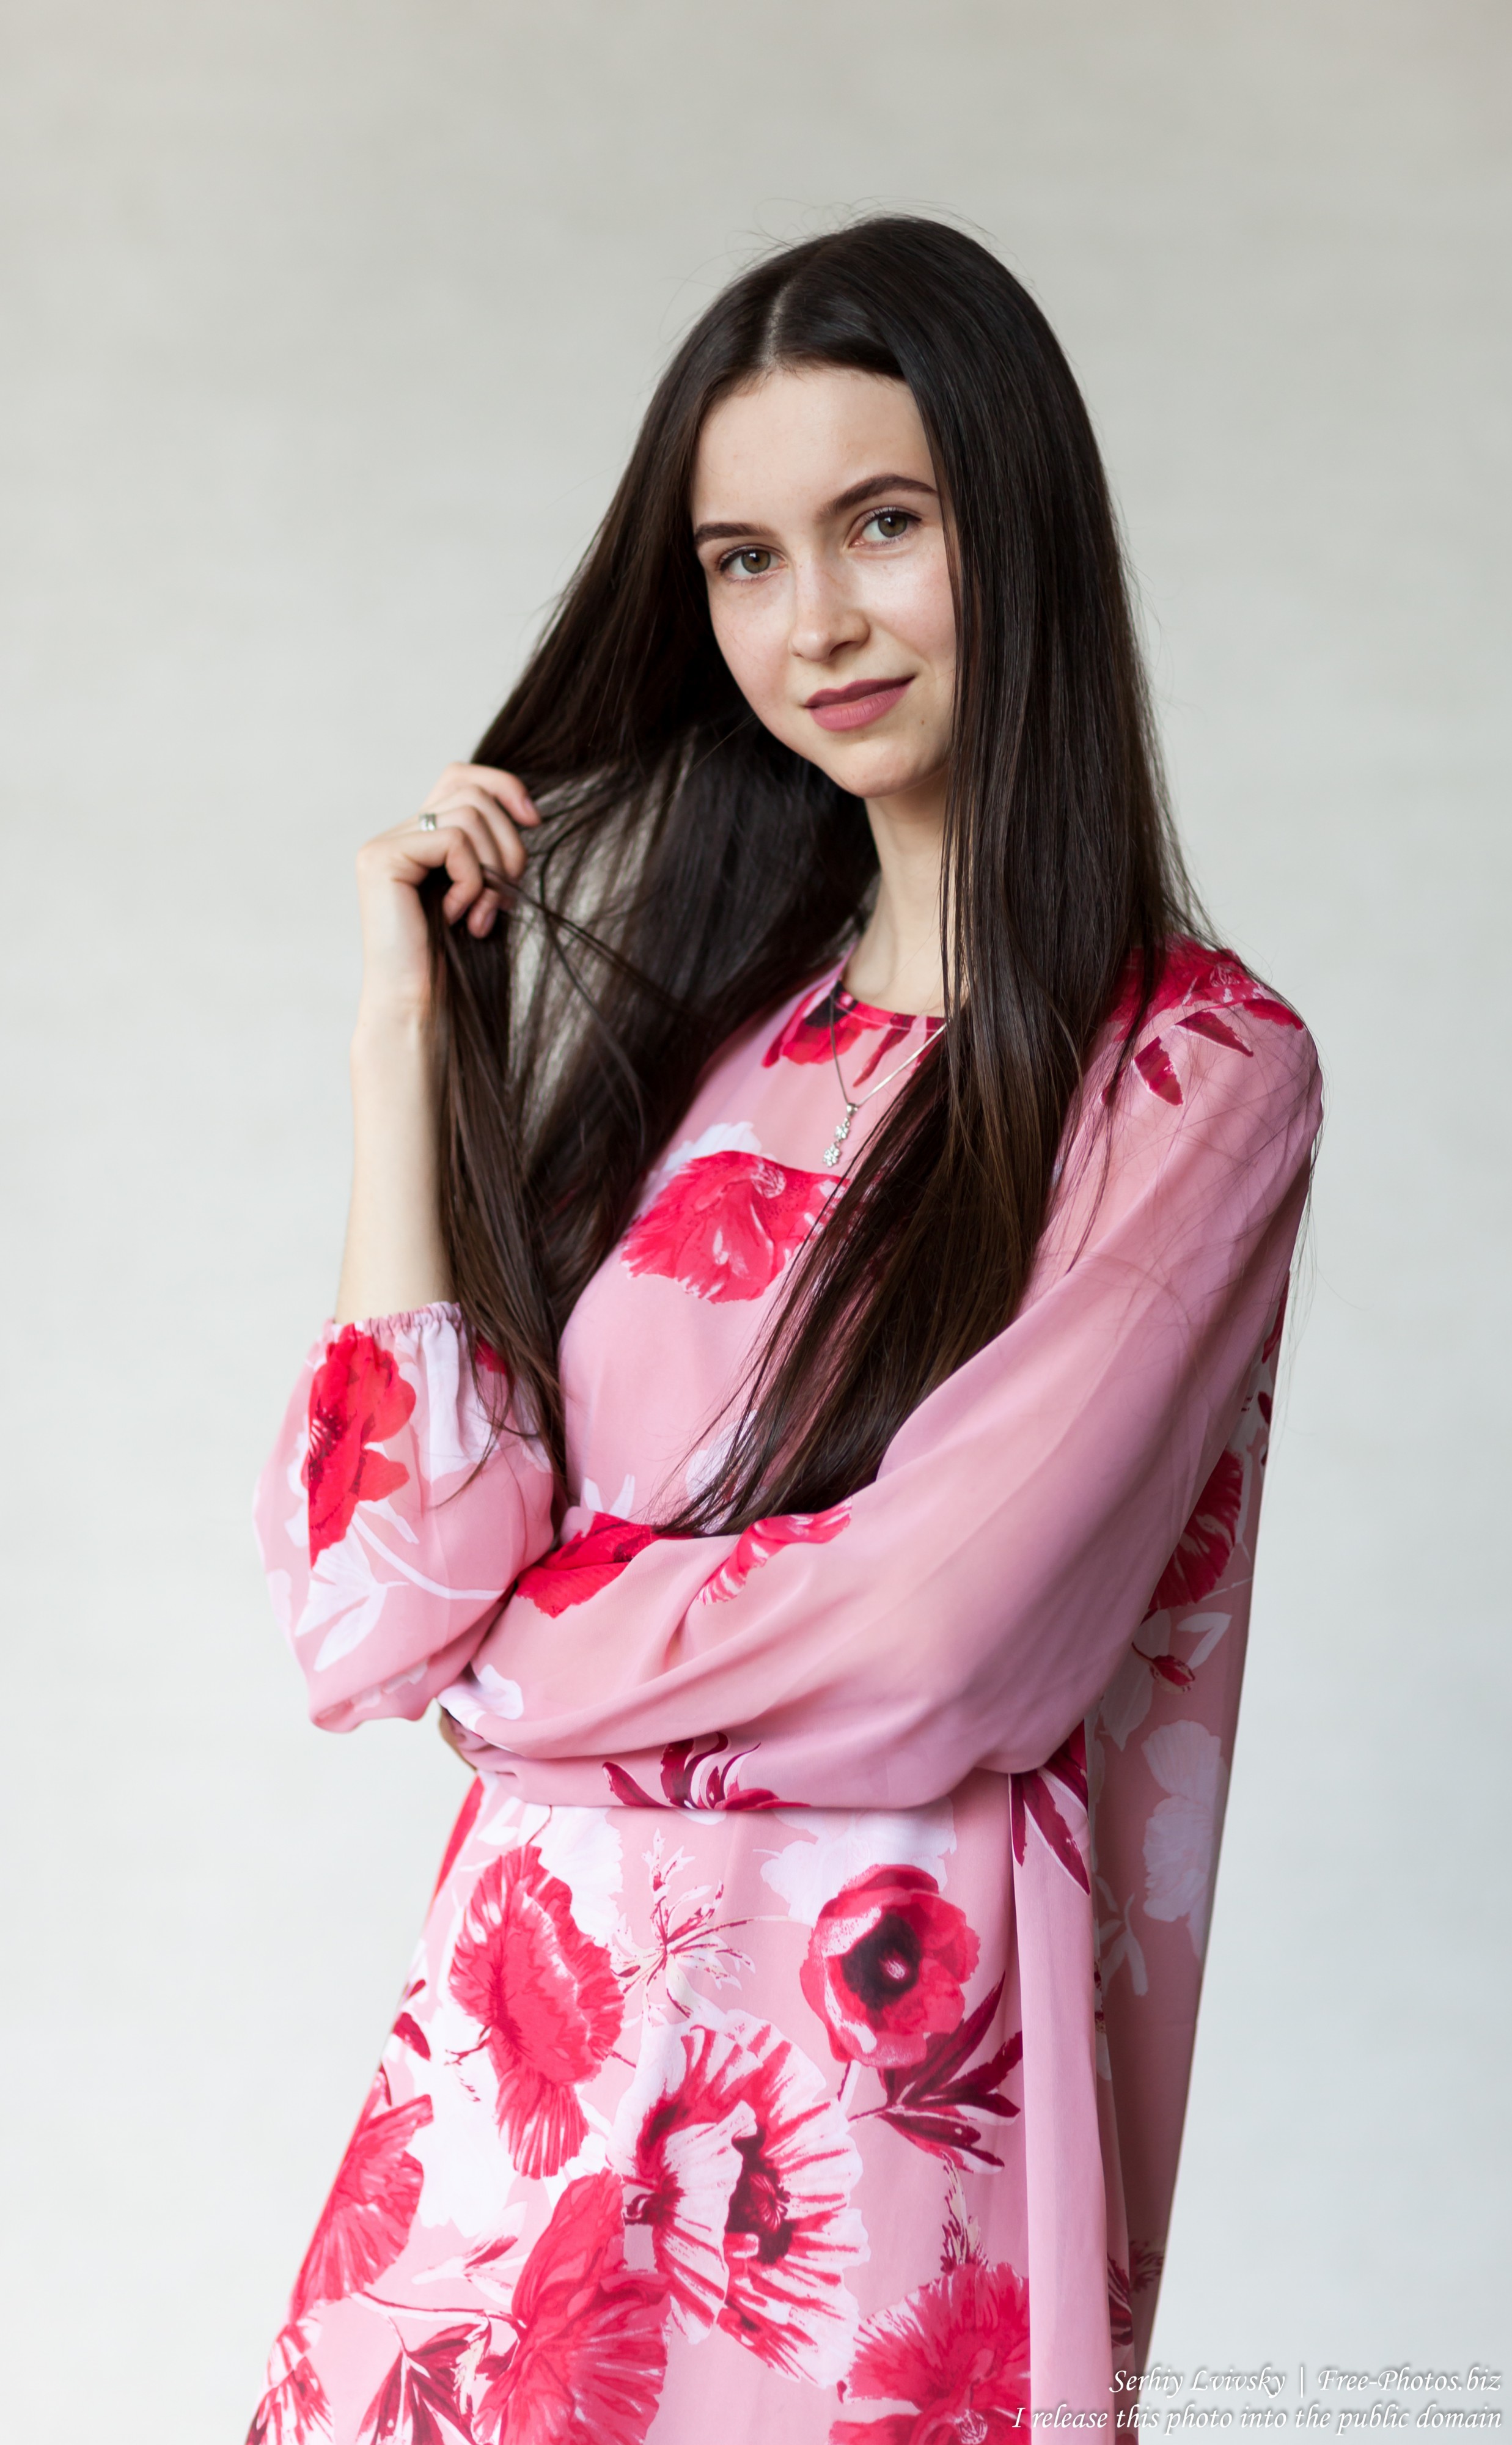 Photo Of Vika A 25 Year Old Brunette Woman Photographed By Serhiy Lvivsky In July 2018 Picture 33